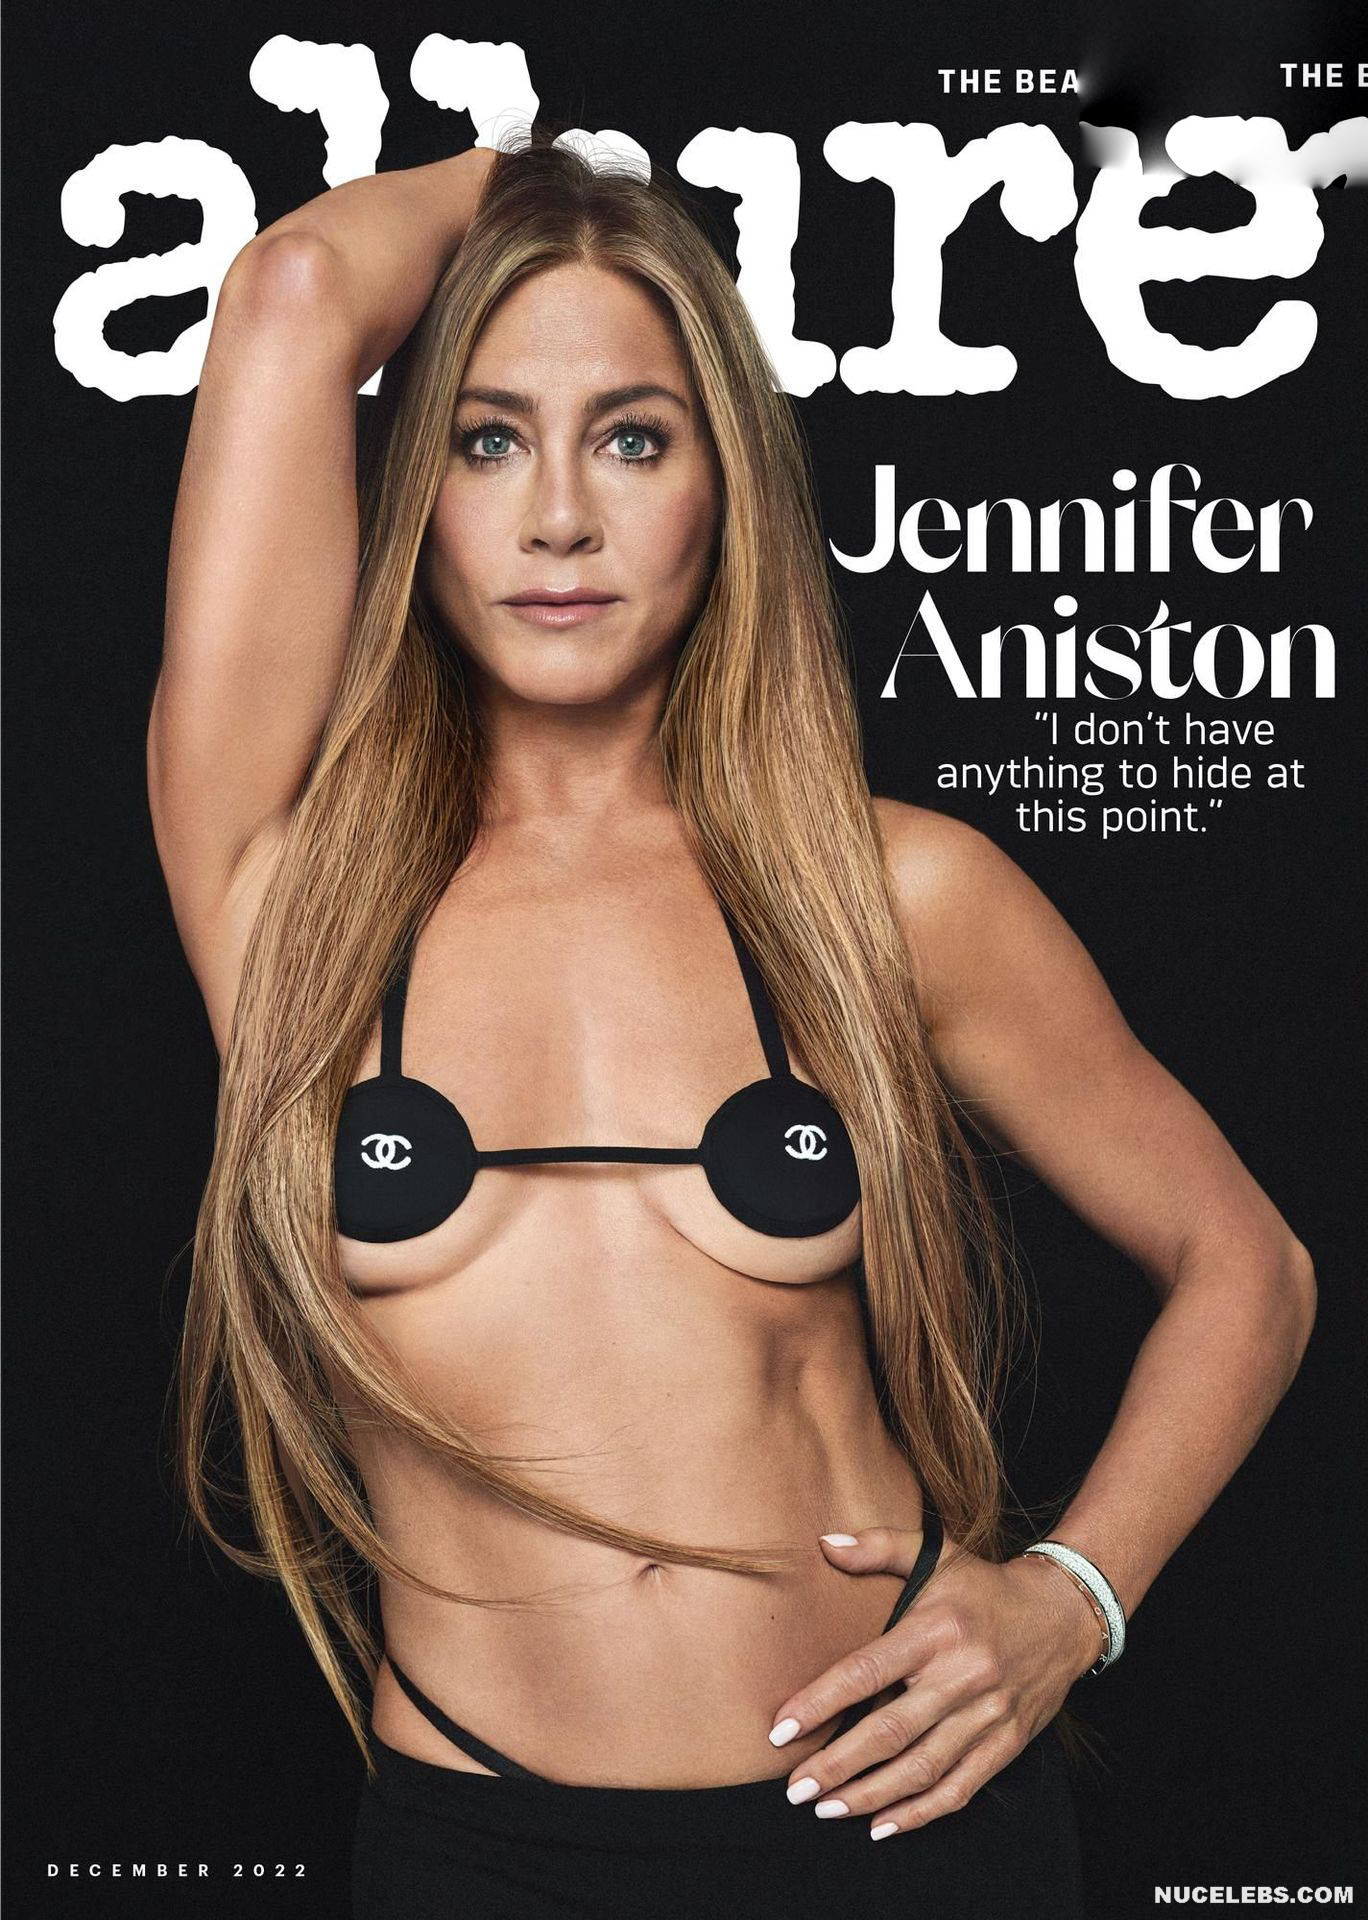 Jennifer Aniston Nude Topless And Sexy Photos pic pic